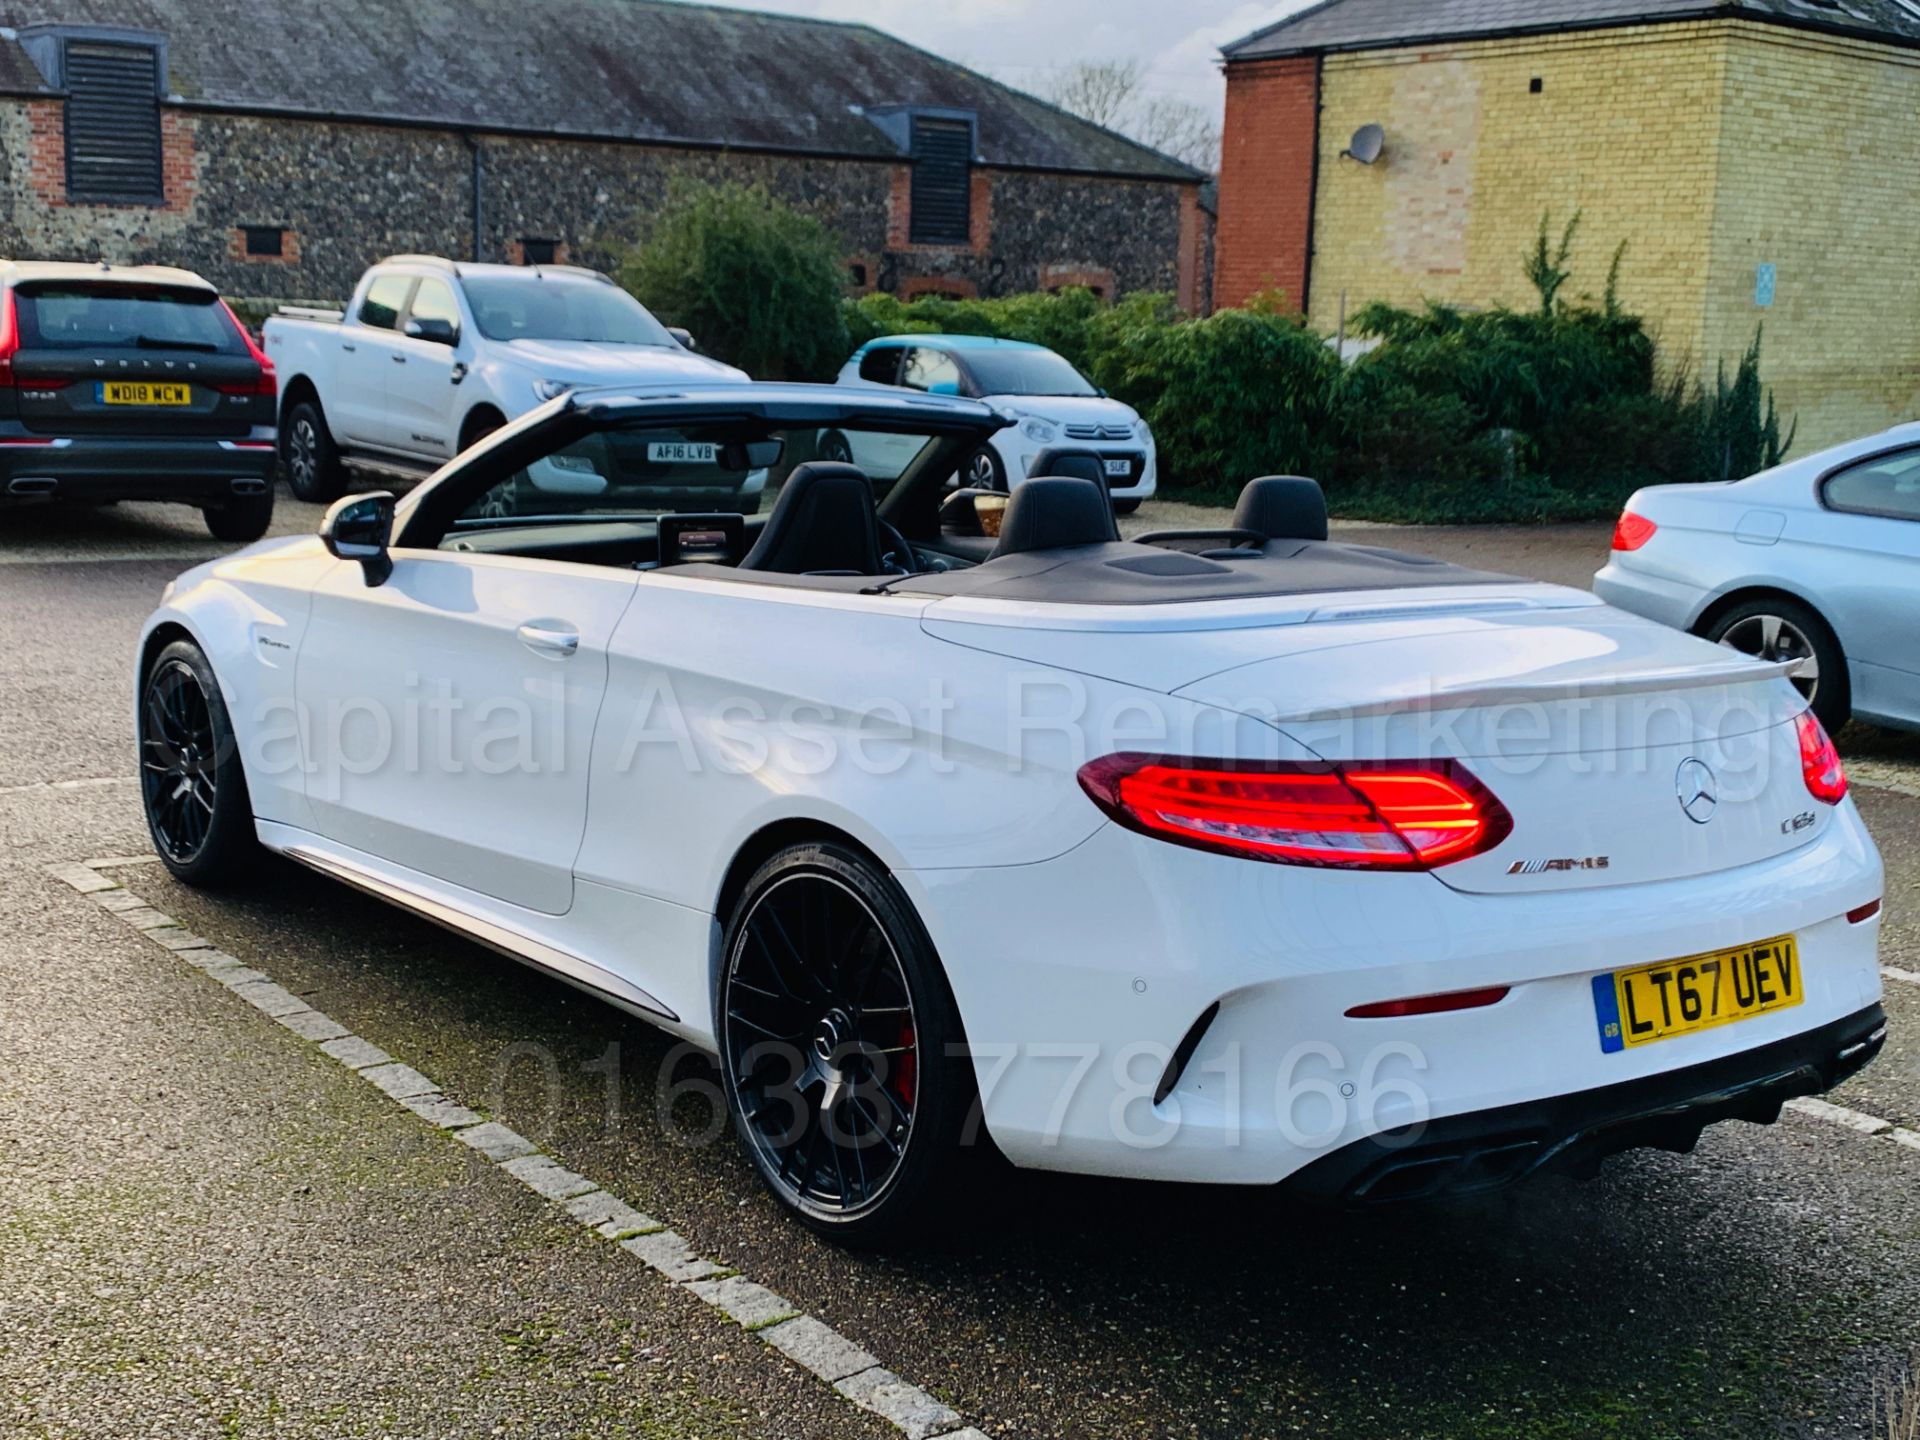 (On Sale) MERCEDES-BENZ AMG C63-S *CABRIOLET* (67 REG) '4.0 BI-TURBO -510 BHP - AUTO' *FULLY LOADED* - Image 17 of 79